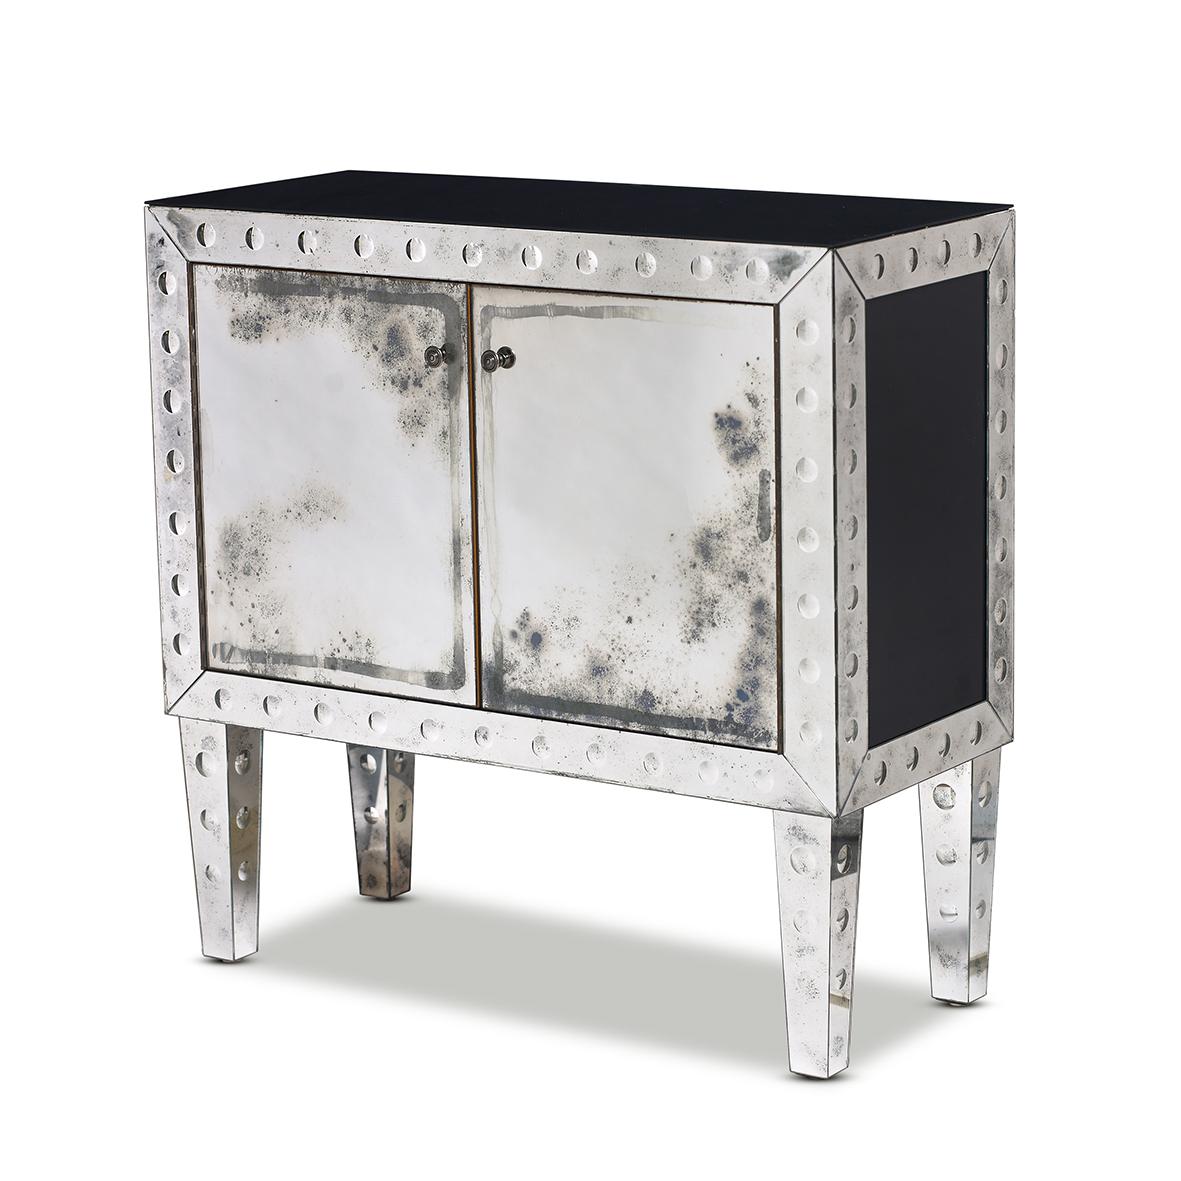 Mid-20th Century Fine Quality Etched Mirrored Glass Cocktail Cabinet, French, circa 1960